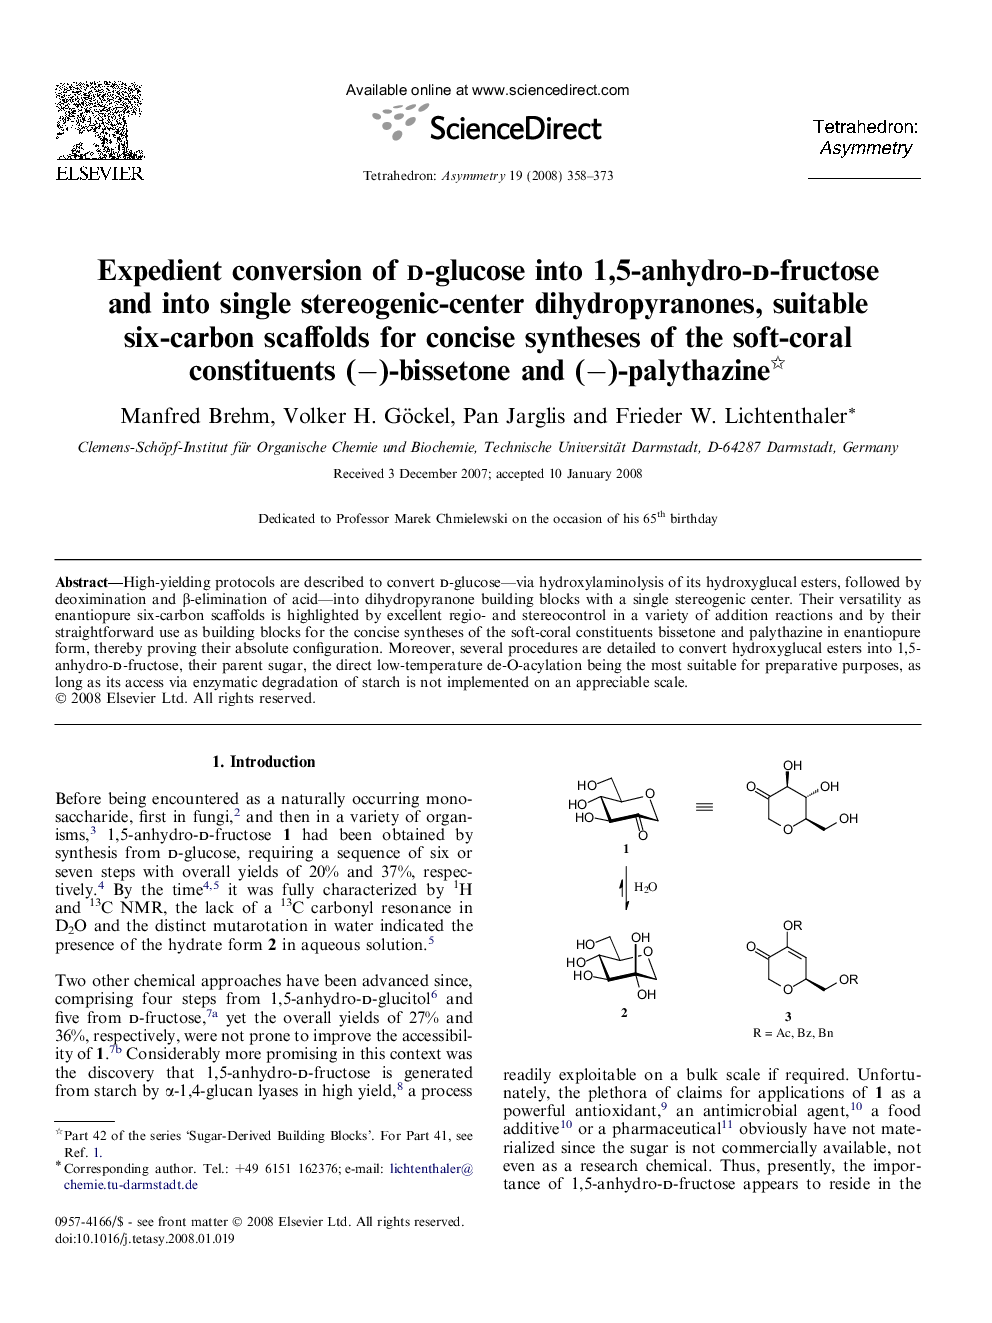 Expedient conversion of d-glucose into 1,5-anhydro-d-fructose and into single stereogenic-center dihydropyranones, suitable six-carbon scaffolds for concise syntheses of the soft-coral constituents (−)-bissetone and (−)-palythazine 